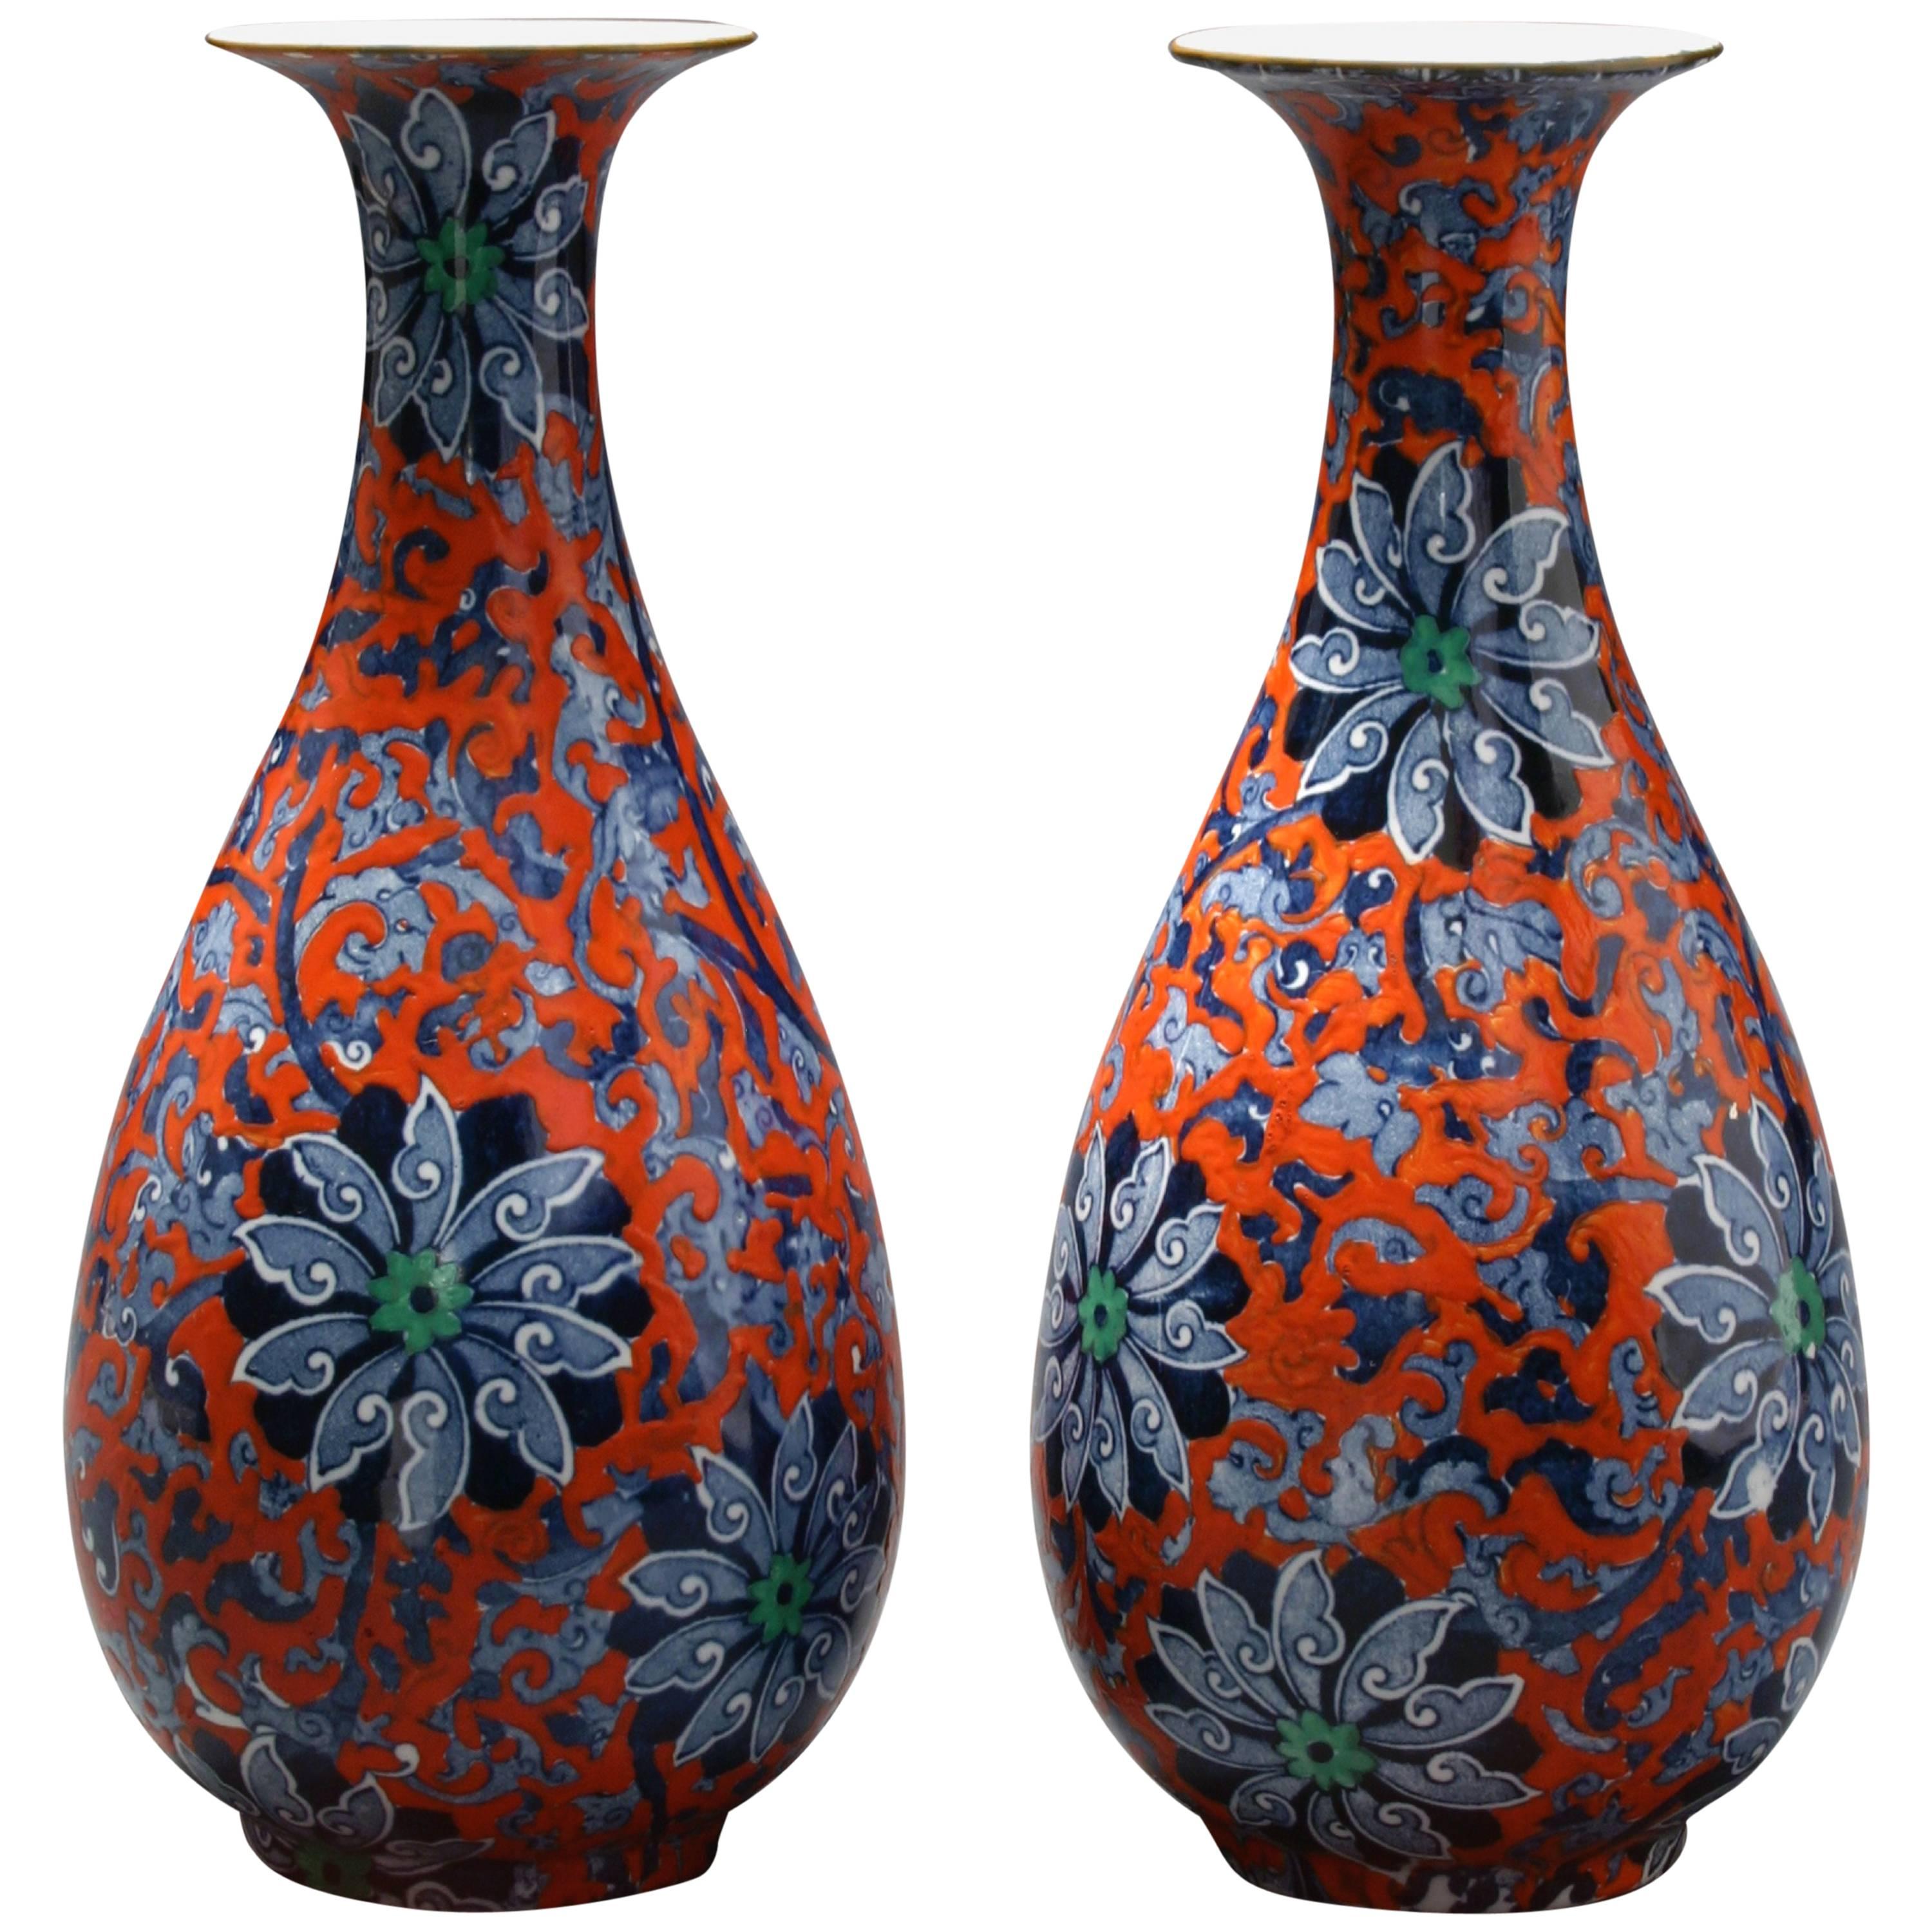 Pair of English Ironstone Vases in the Manner of Turkish Iznik Ware For Sale